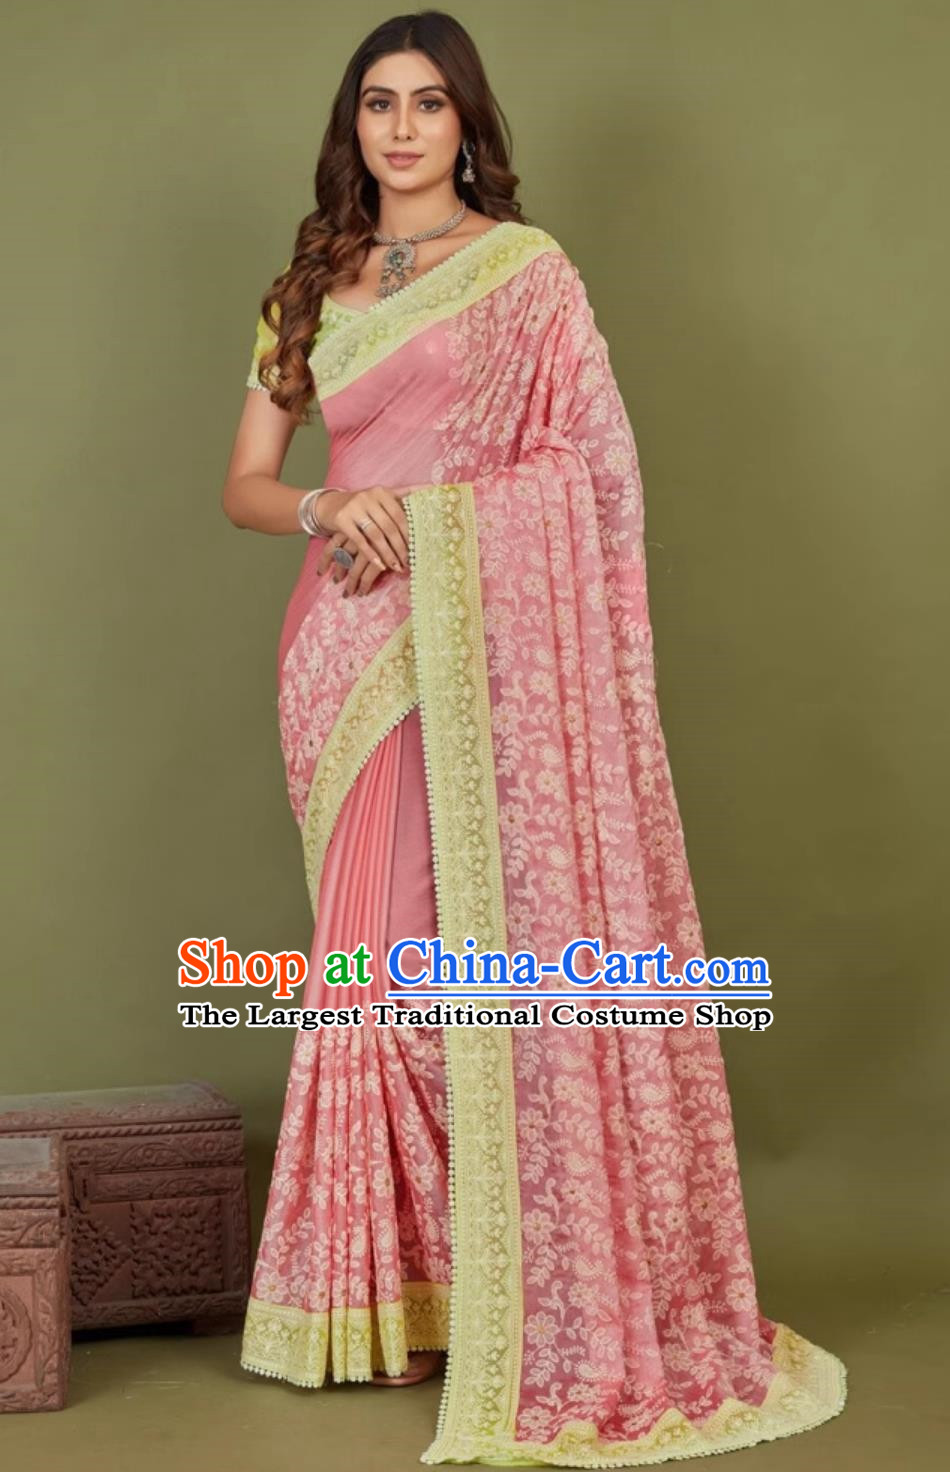 India Woman Summer Costume Indian National Clothing Traditional Festival Pink Embroidered Sari Dress